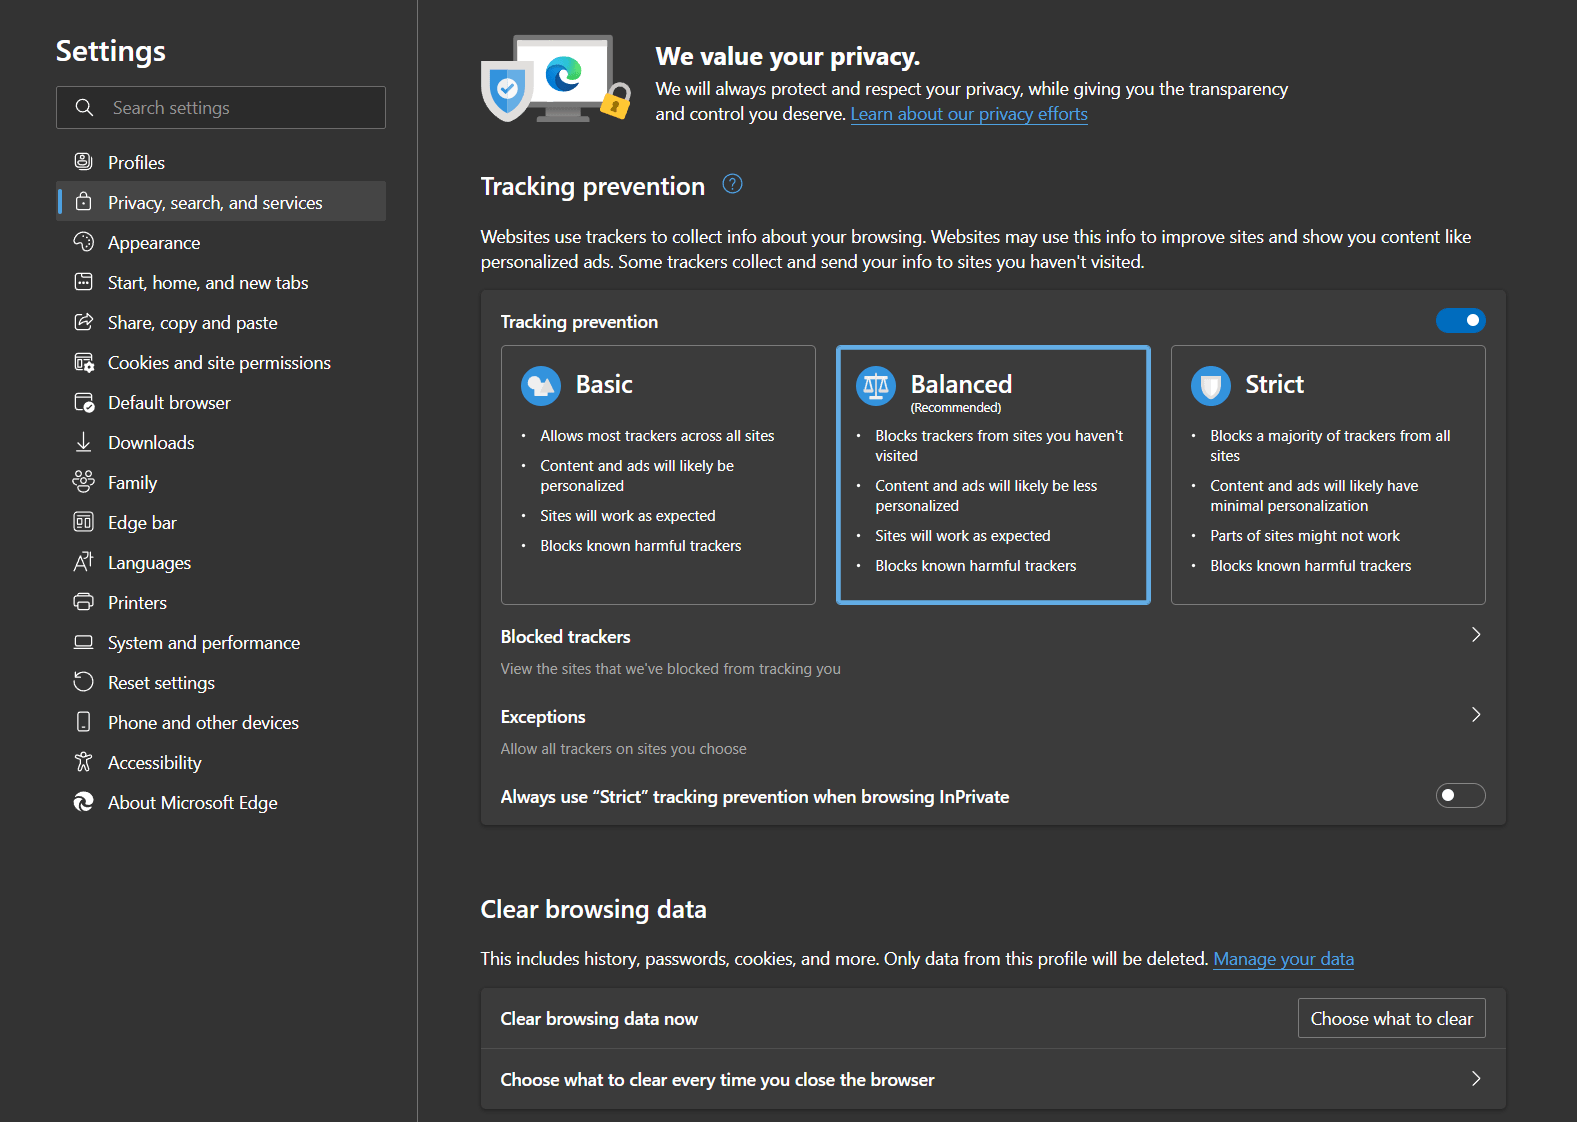 Clear web browser cache on Microsoft Edge to fix ChatGPT 'Your session has expired. Please log in again to continue using the app' or keeps logging or signing out